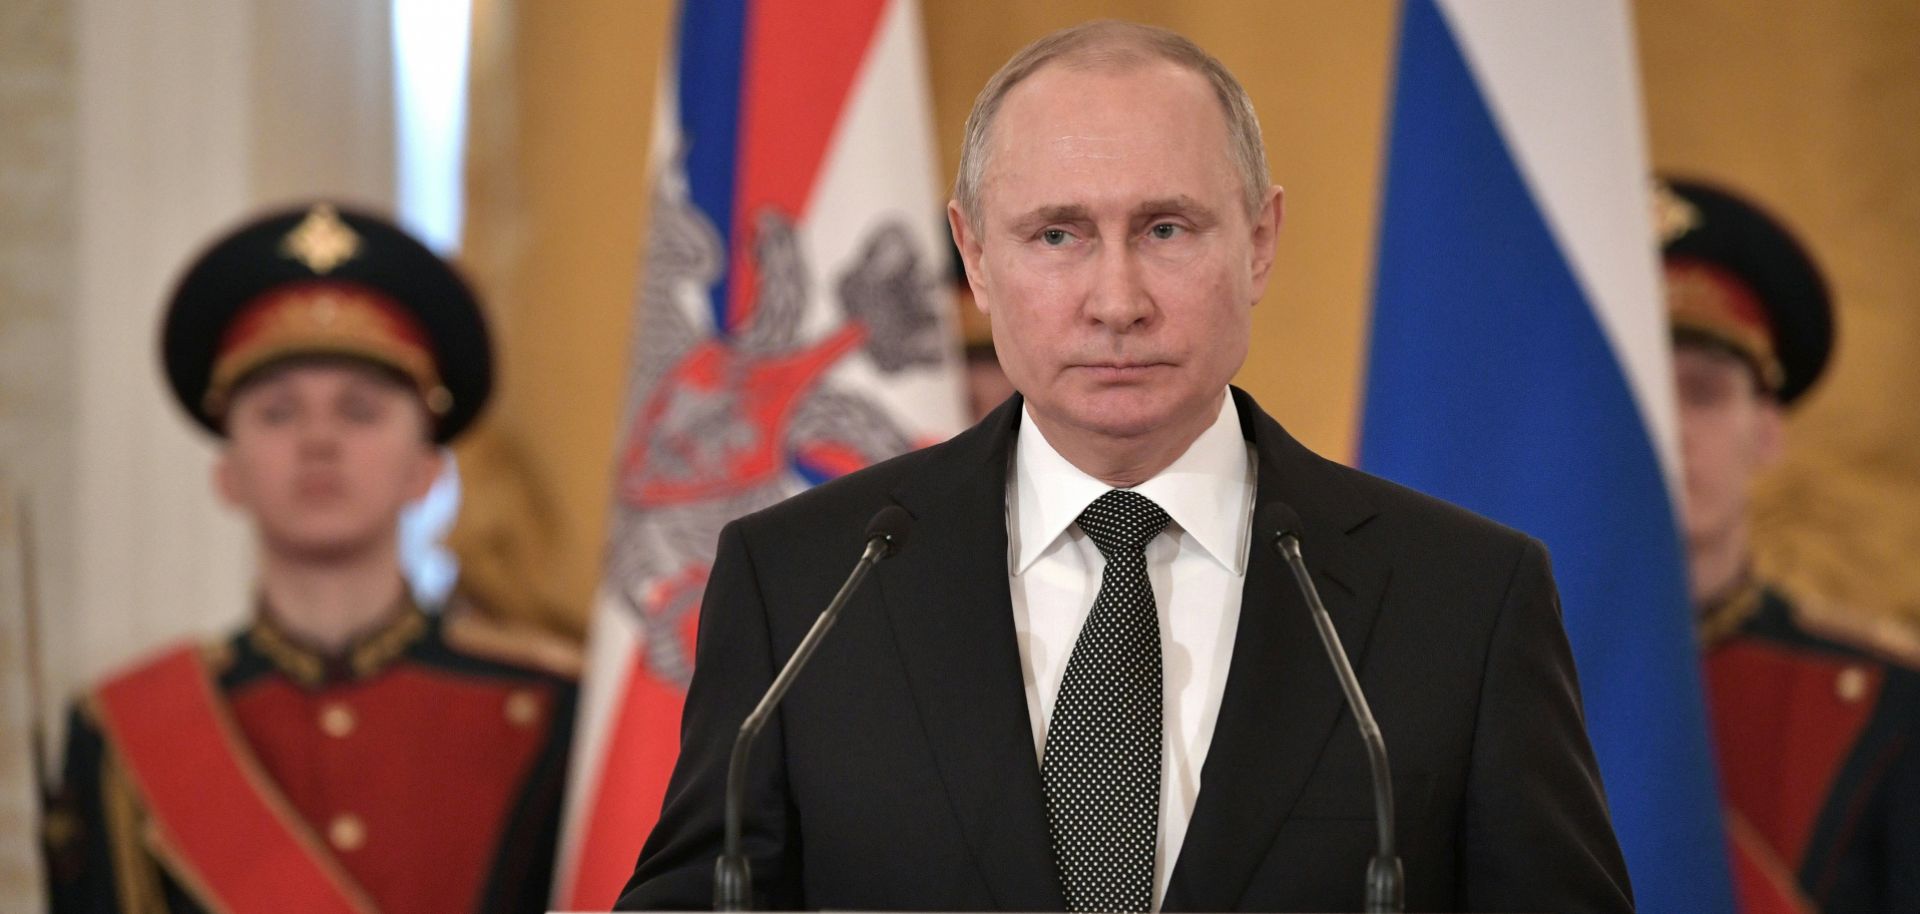 Russian President Vladimir Putin is all but certain to win a fourth term in office.